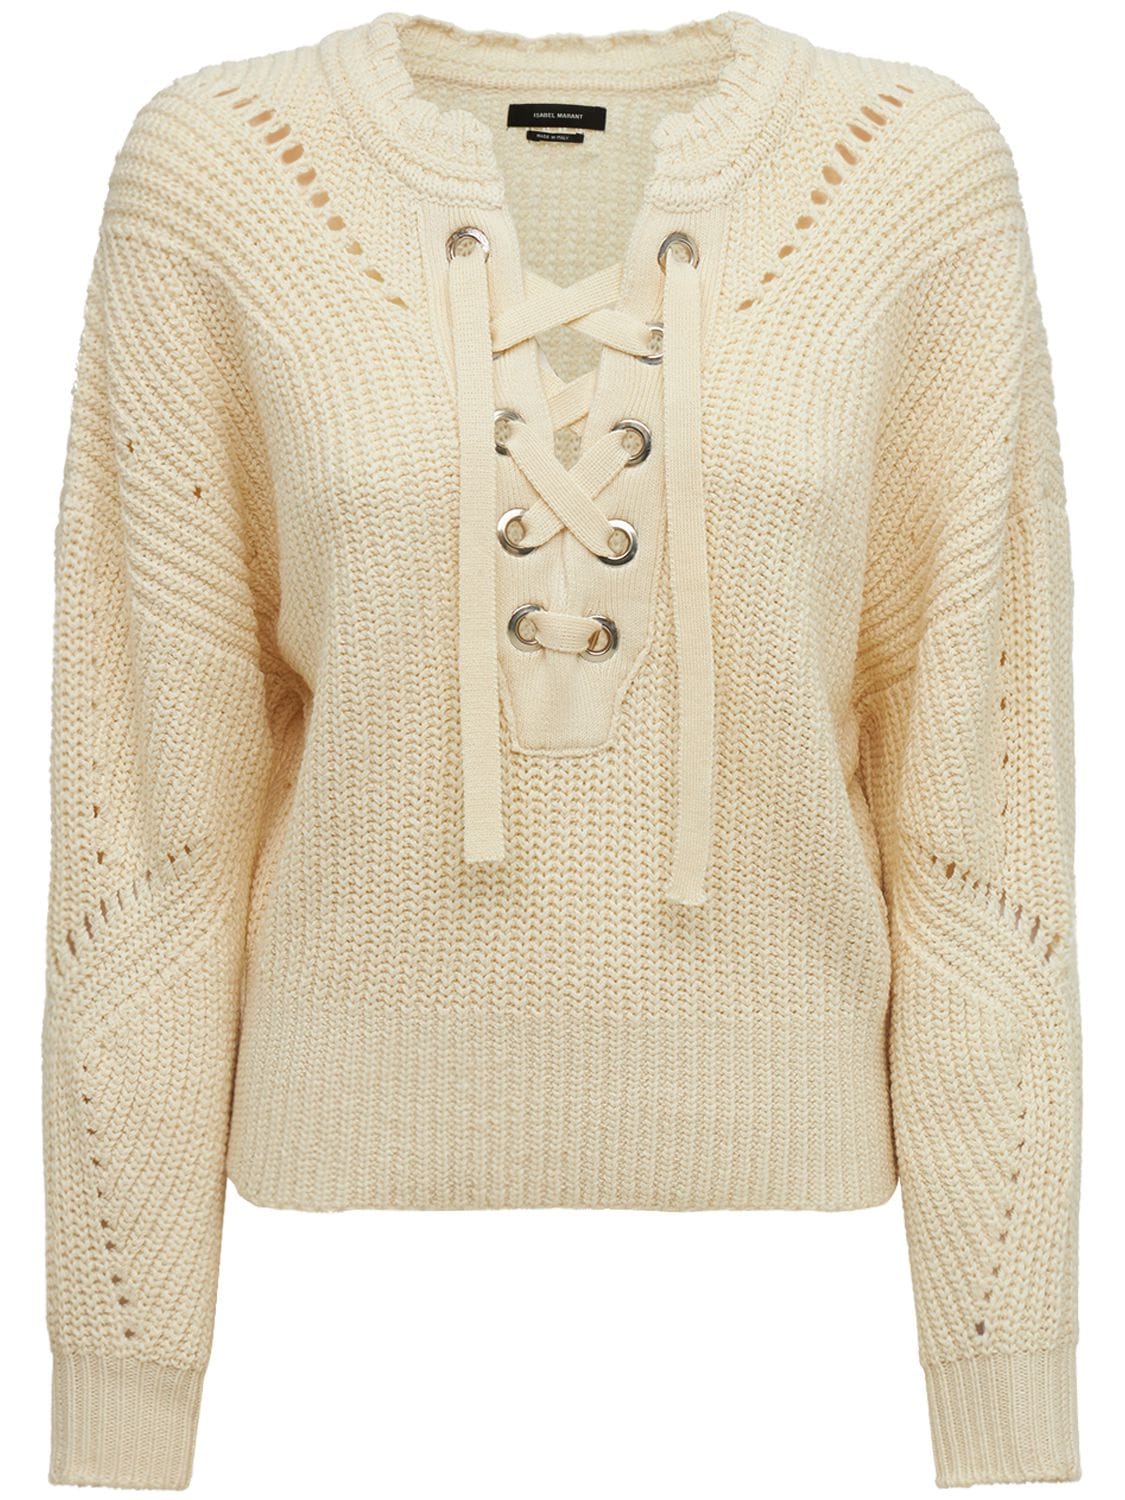 ISABEL MARANT Laley Cotton Blend Knit Sweater